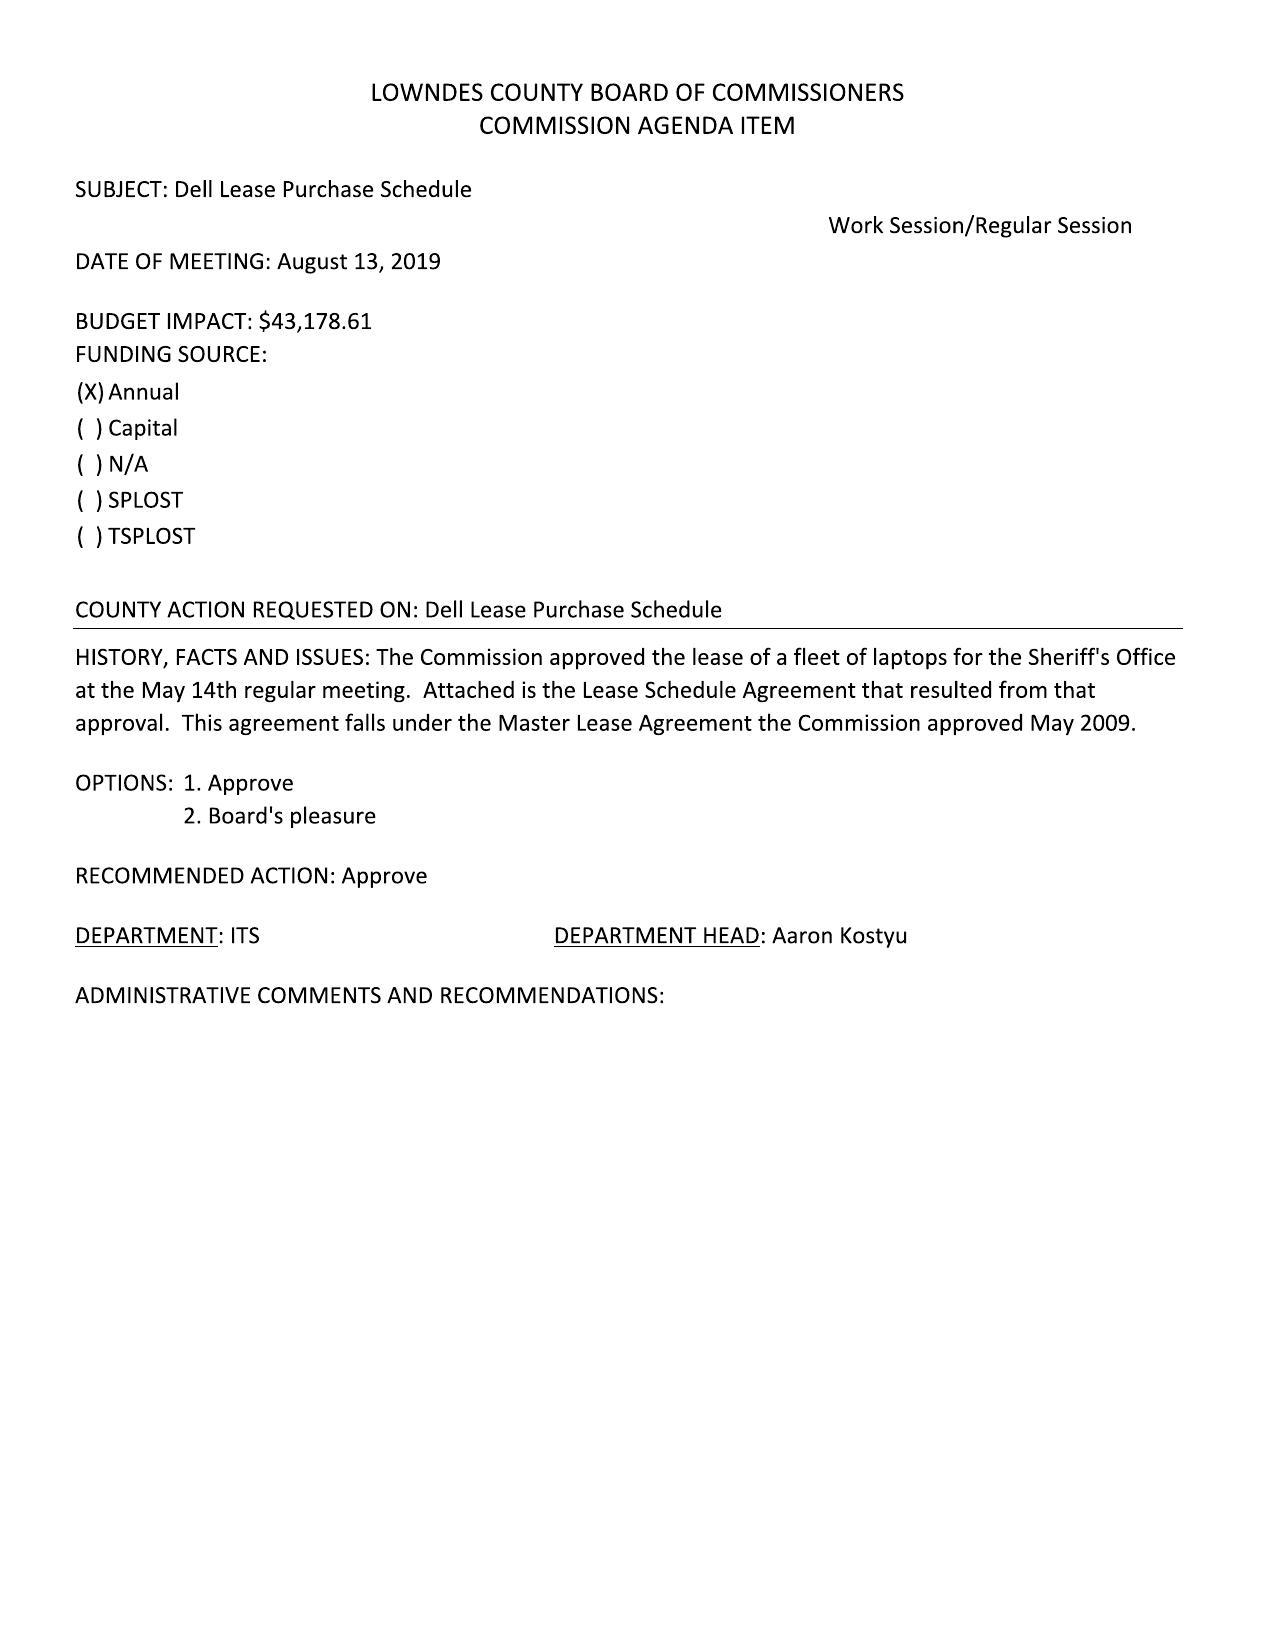 Dell Lease Purchase Schedule Work Session/Regular Session DATE OF MEETING: August 13, 2019